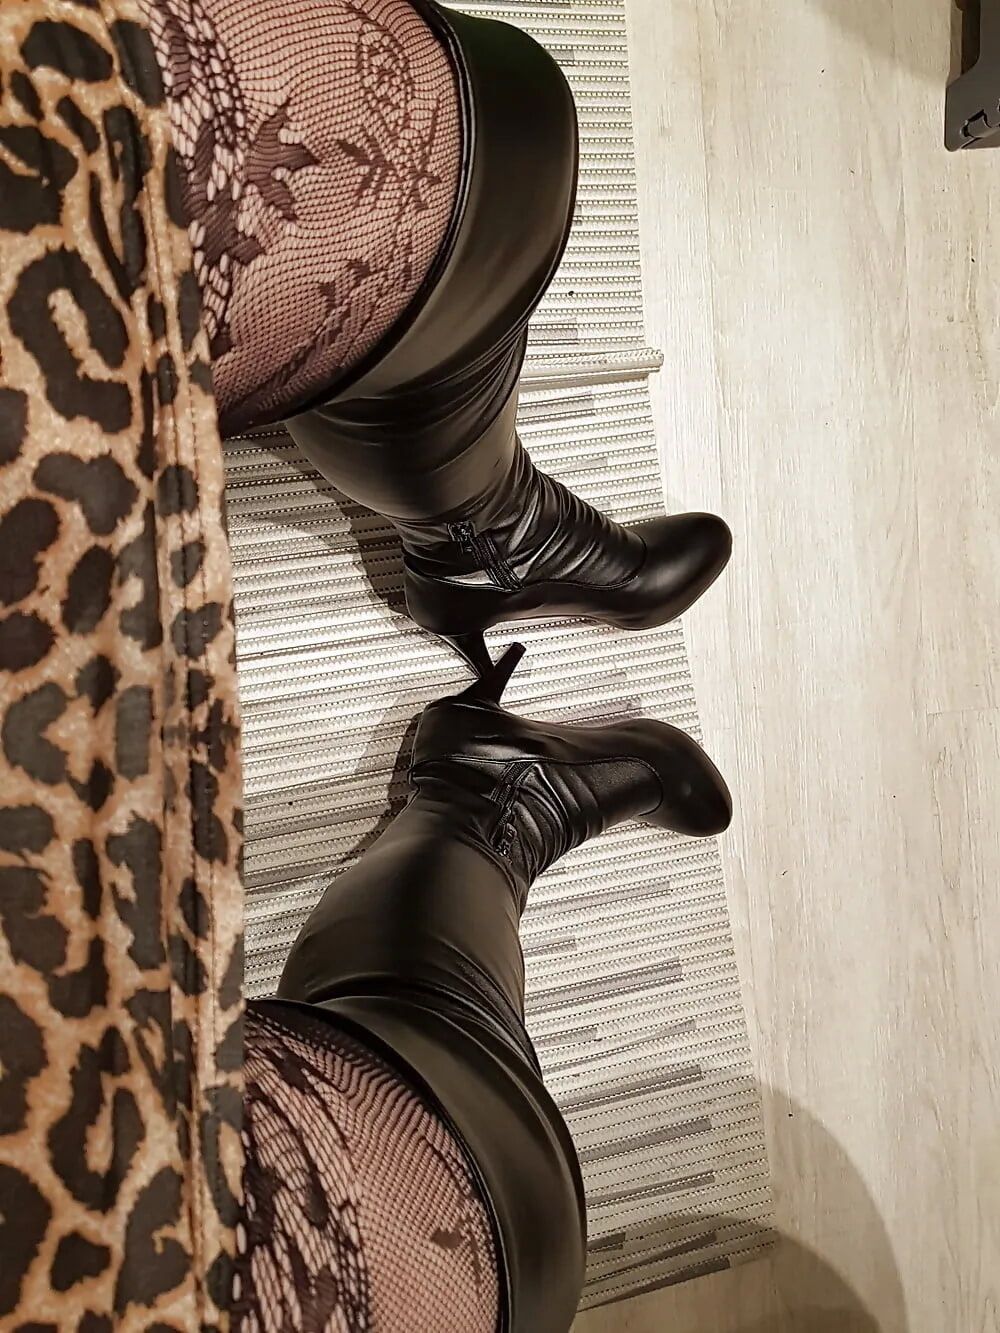 Lepard outfit with black boots and lingerie #6